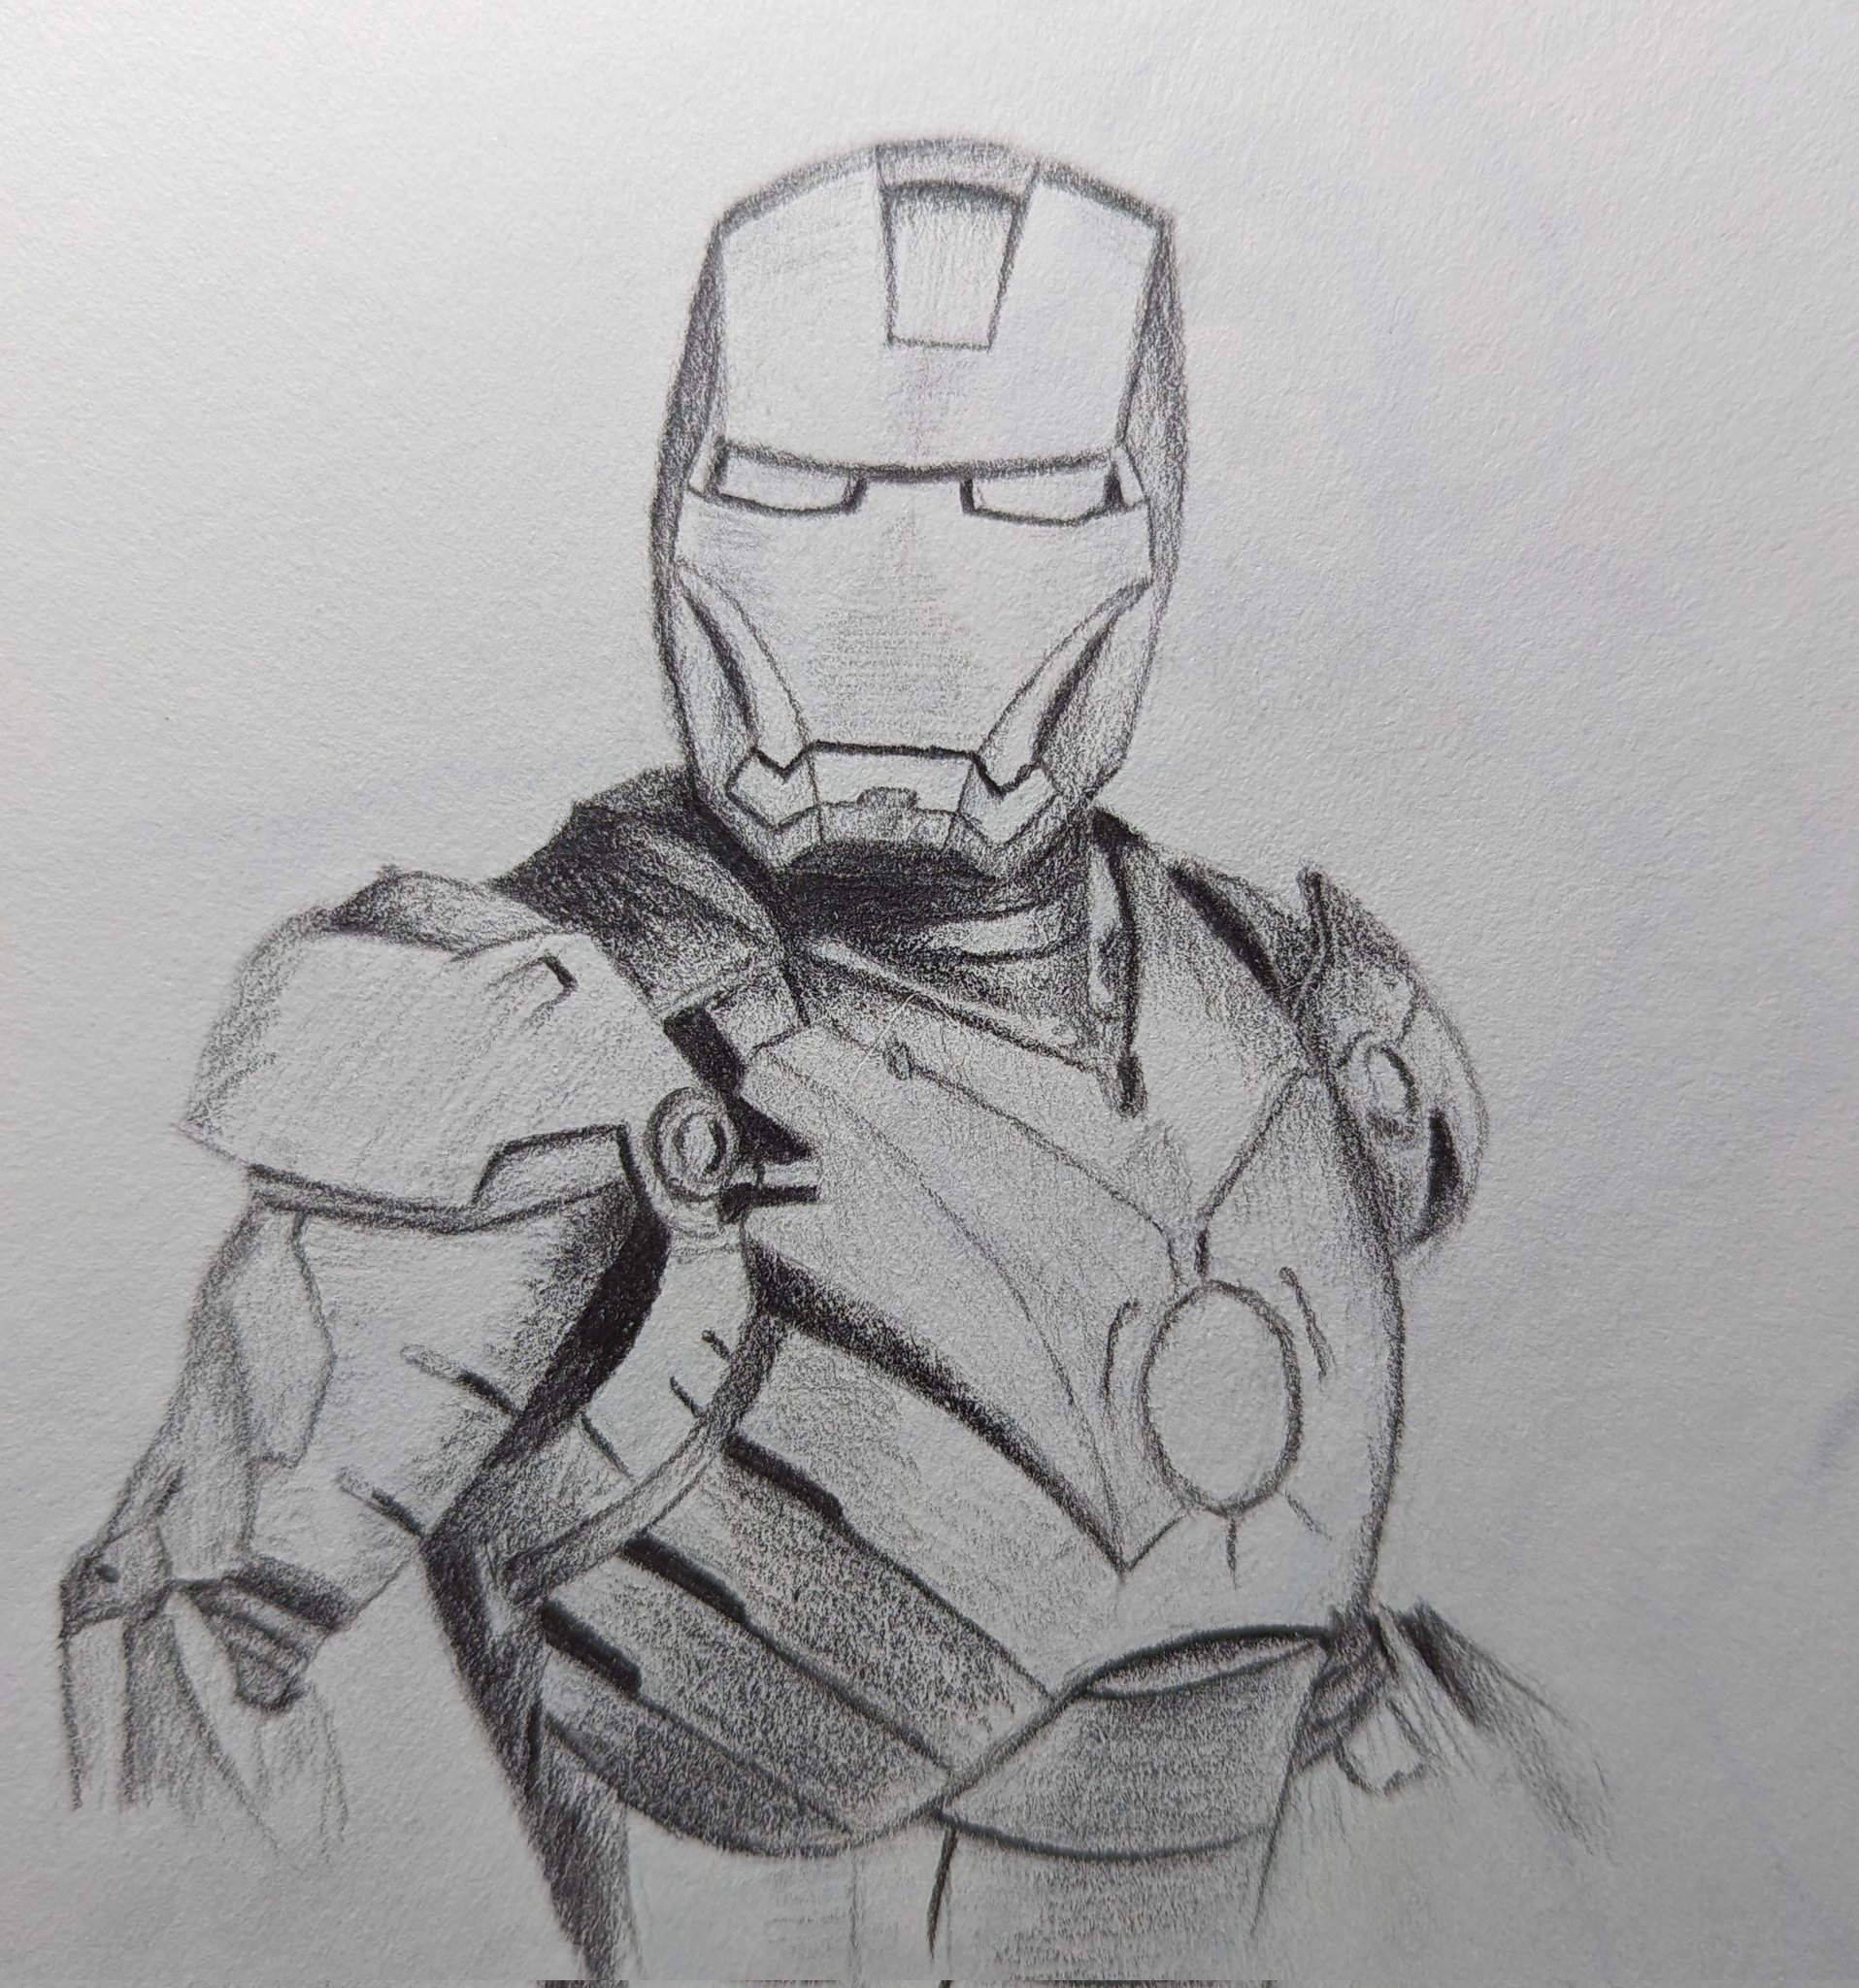 Buy Iron Man Drawing Made in Pencil and Ink From China Online in India -  Etsy